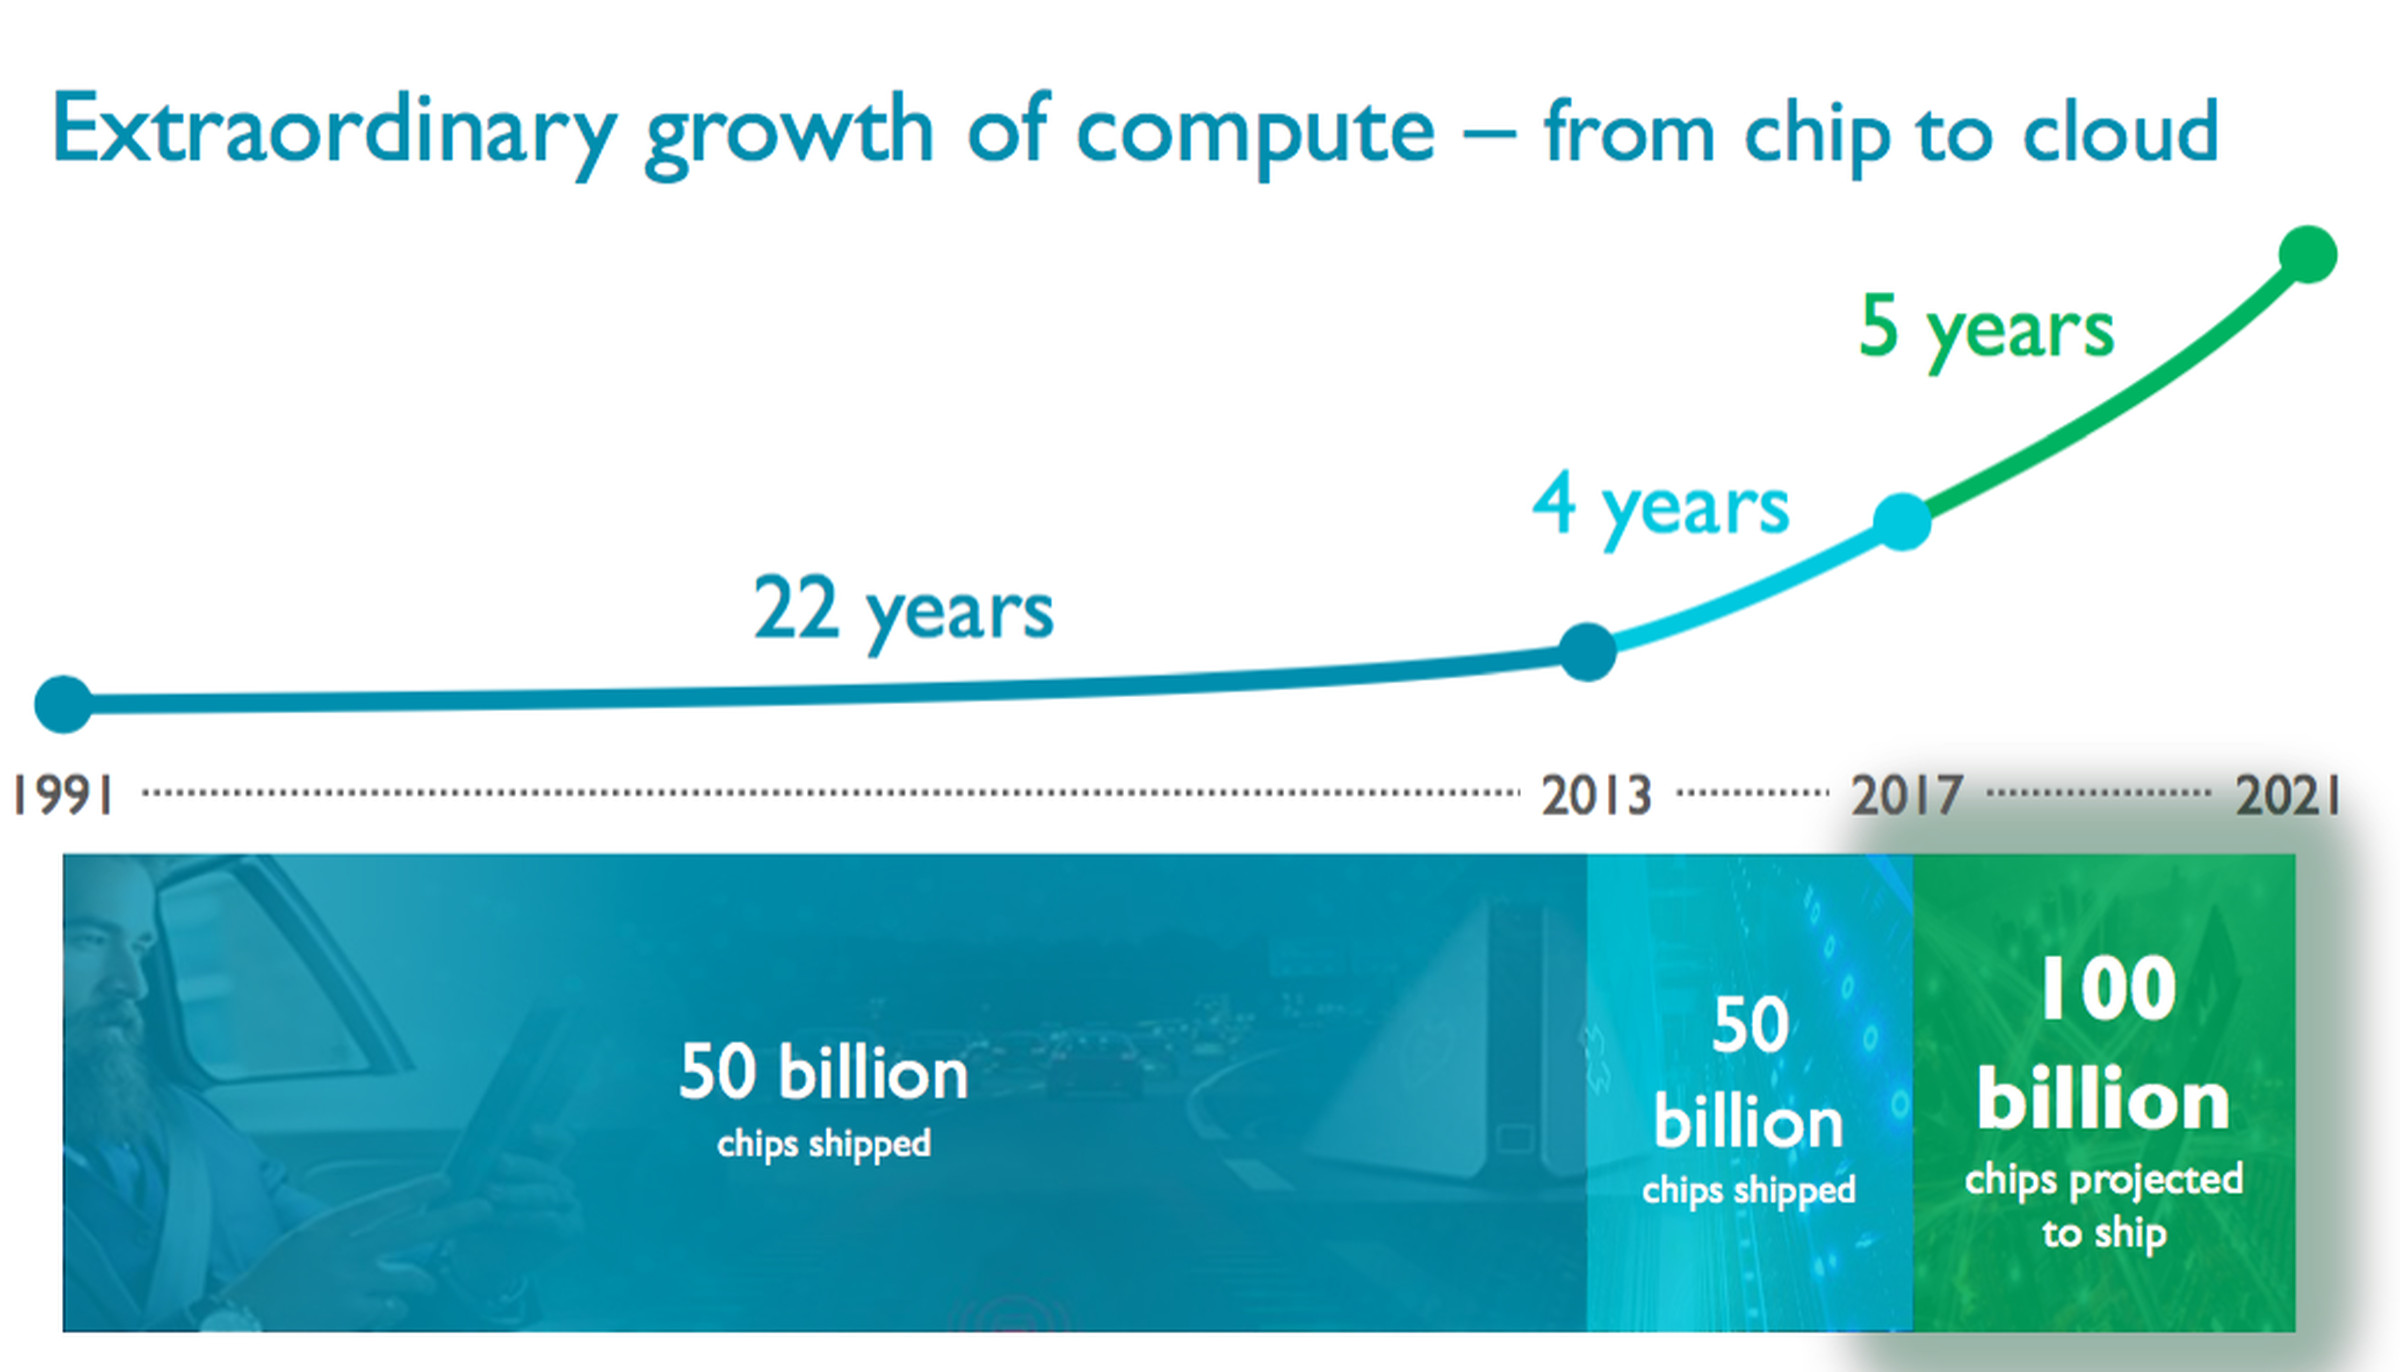 ARM expects to double the number of chips it ships between 2017 and 2021, although the majority of the “next 100 billion” will be existing chip designs.